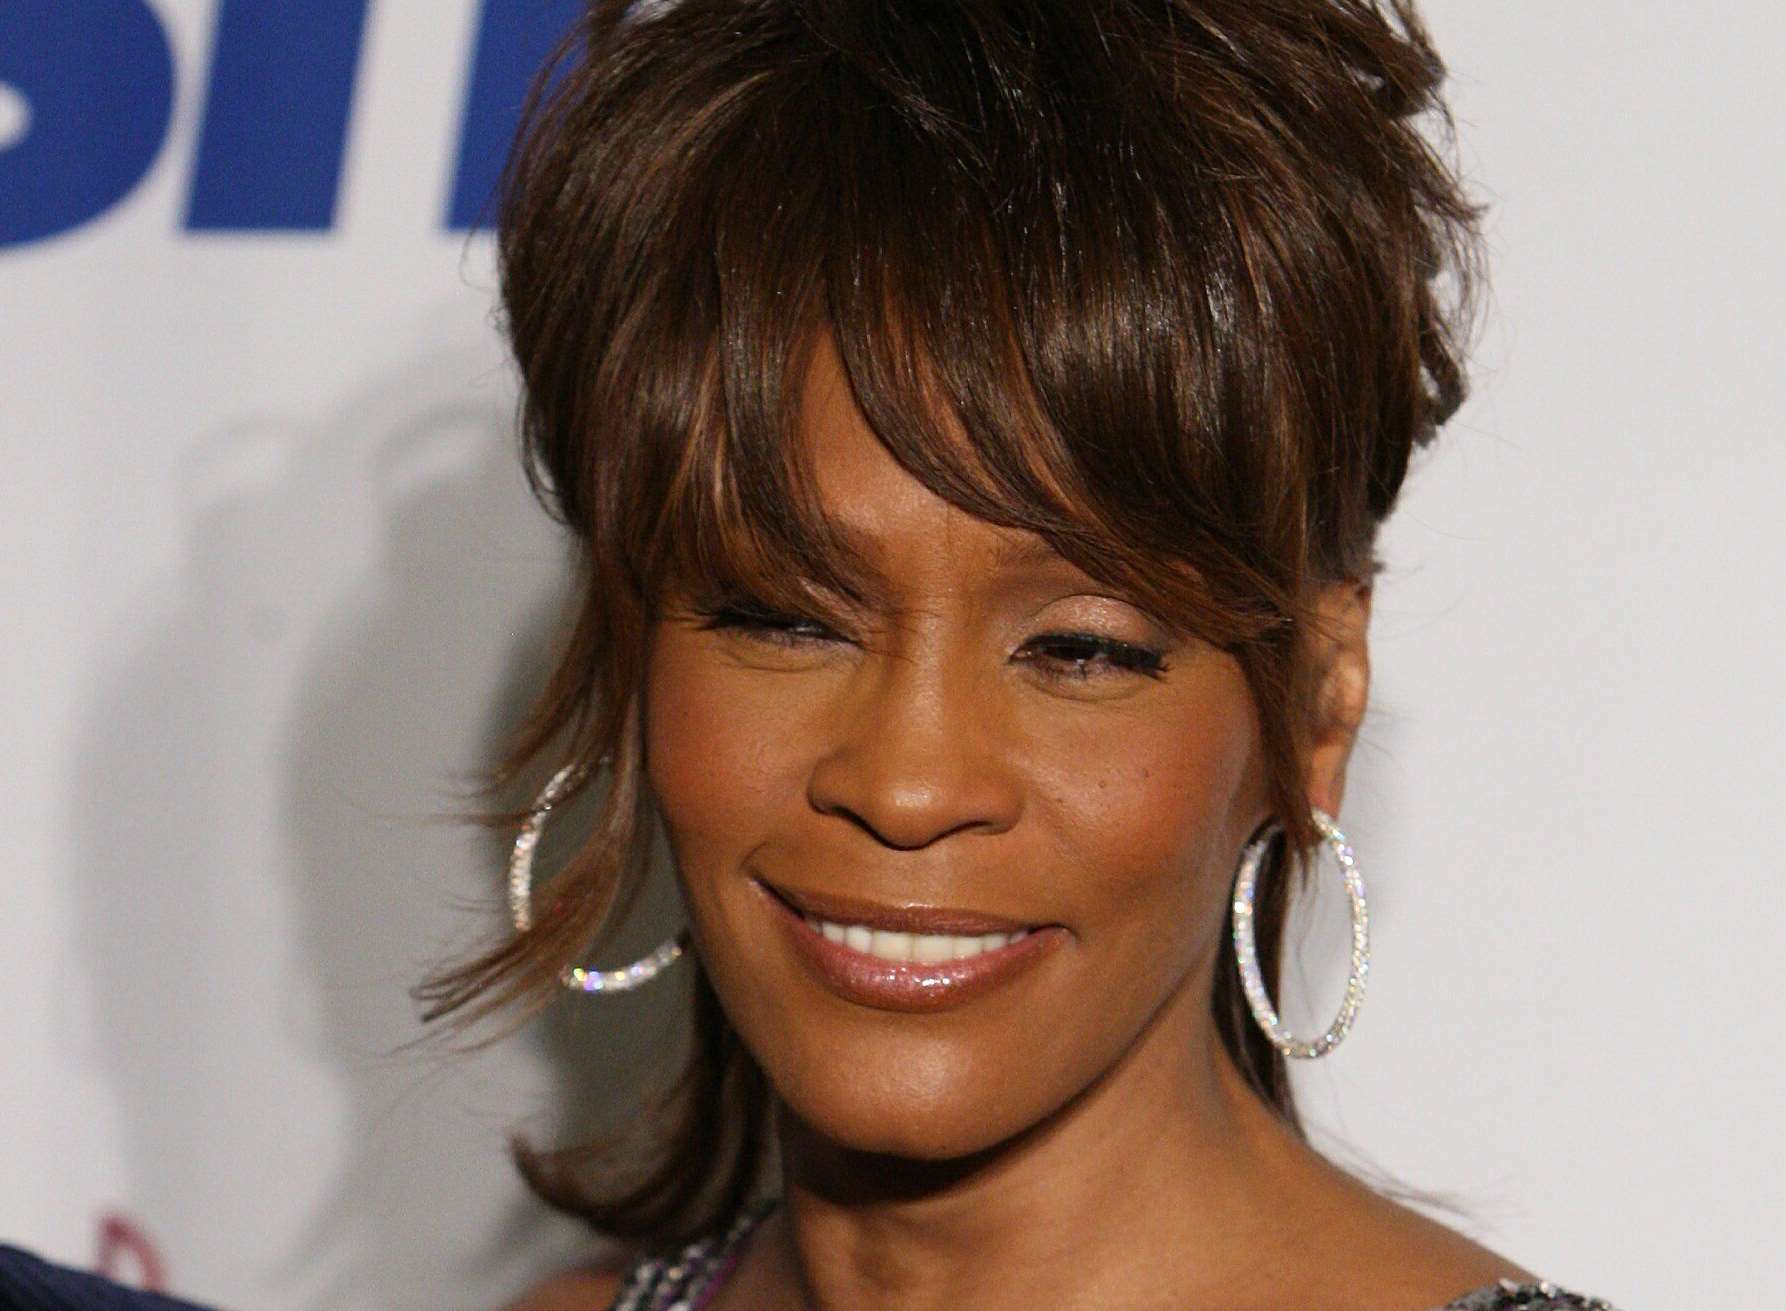 Whitney Houston is one of the best-selling music artists of all-time